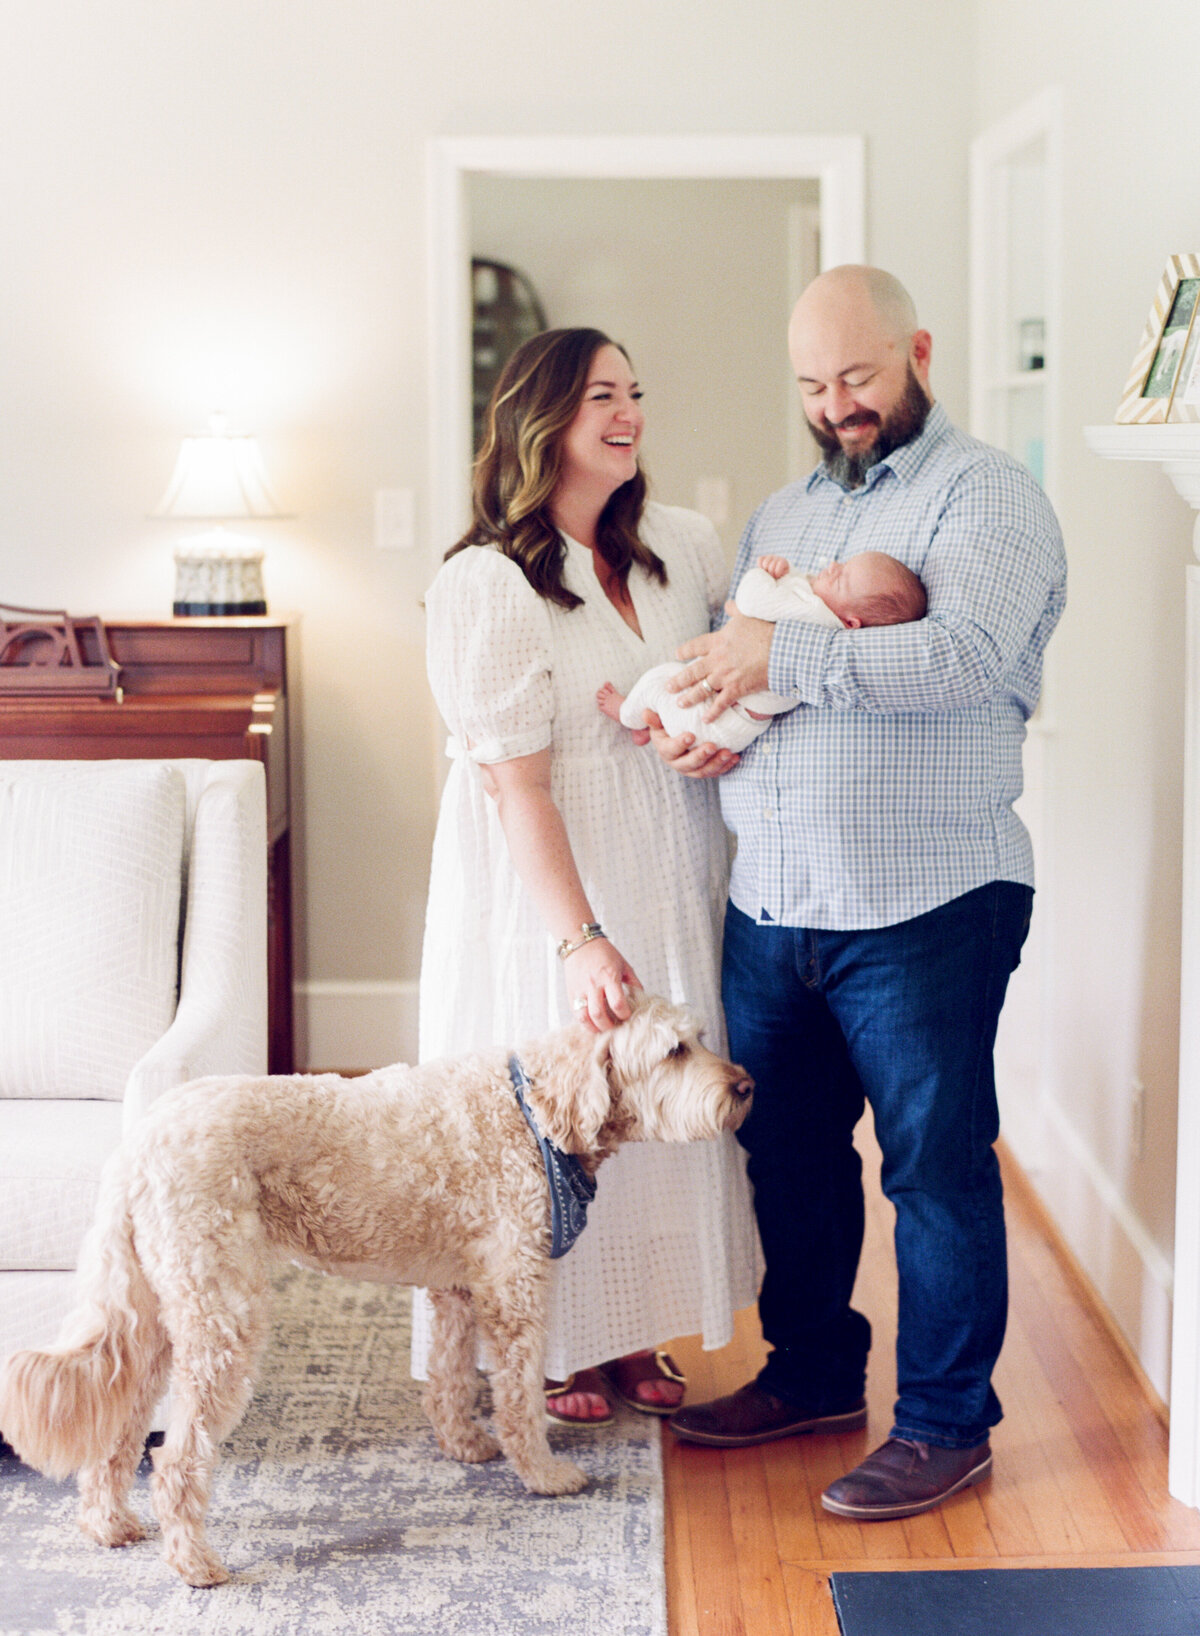 Family stands in their living room holding their newborn during his photo session in Mebane NC. Photographed by Raleigh Newborn Photographer A.J. Dunlap Photography.